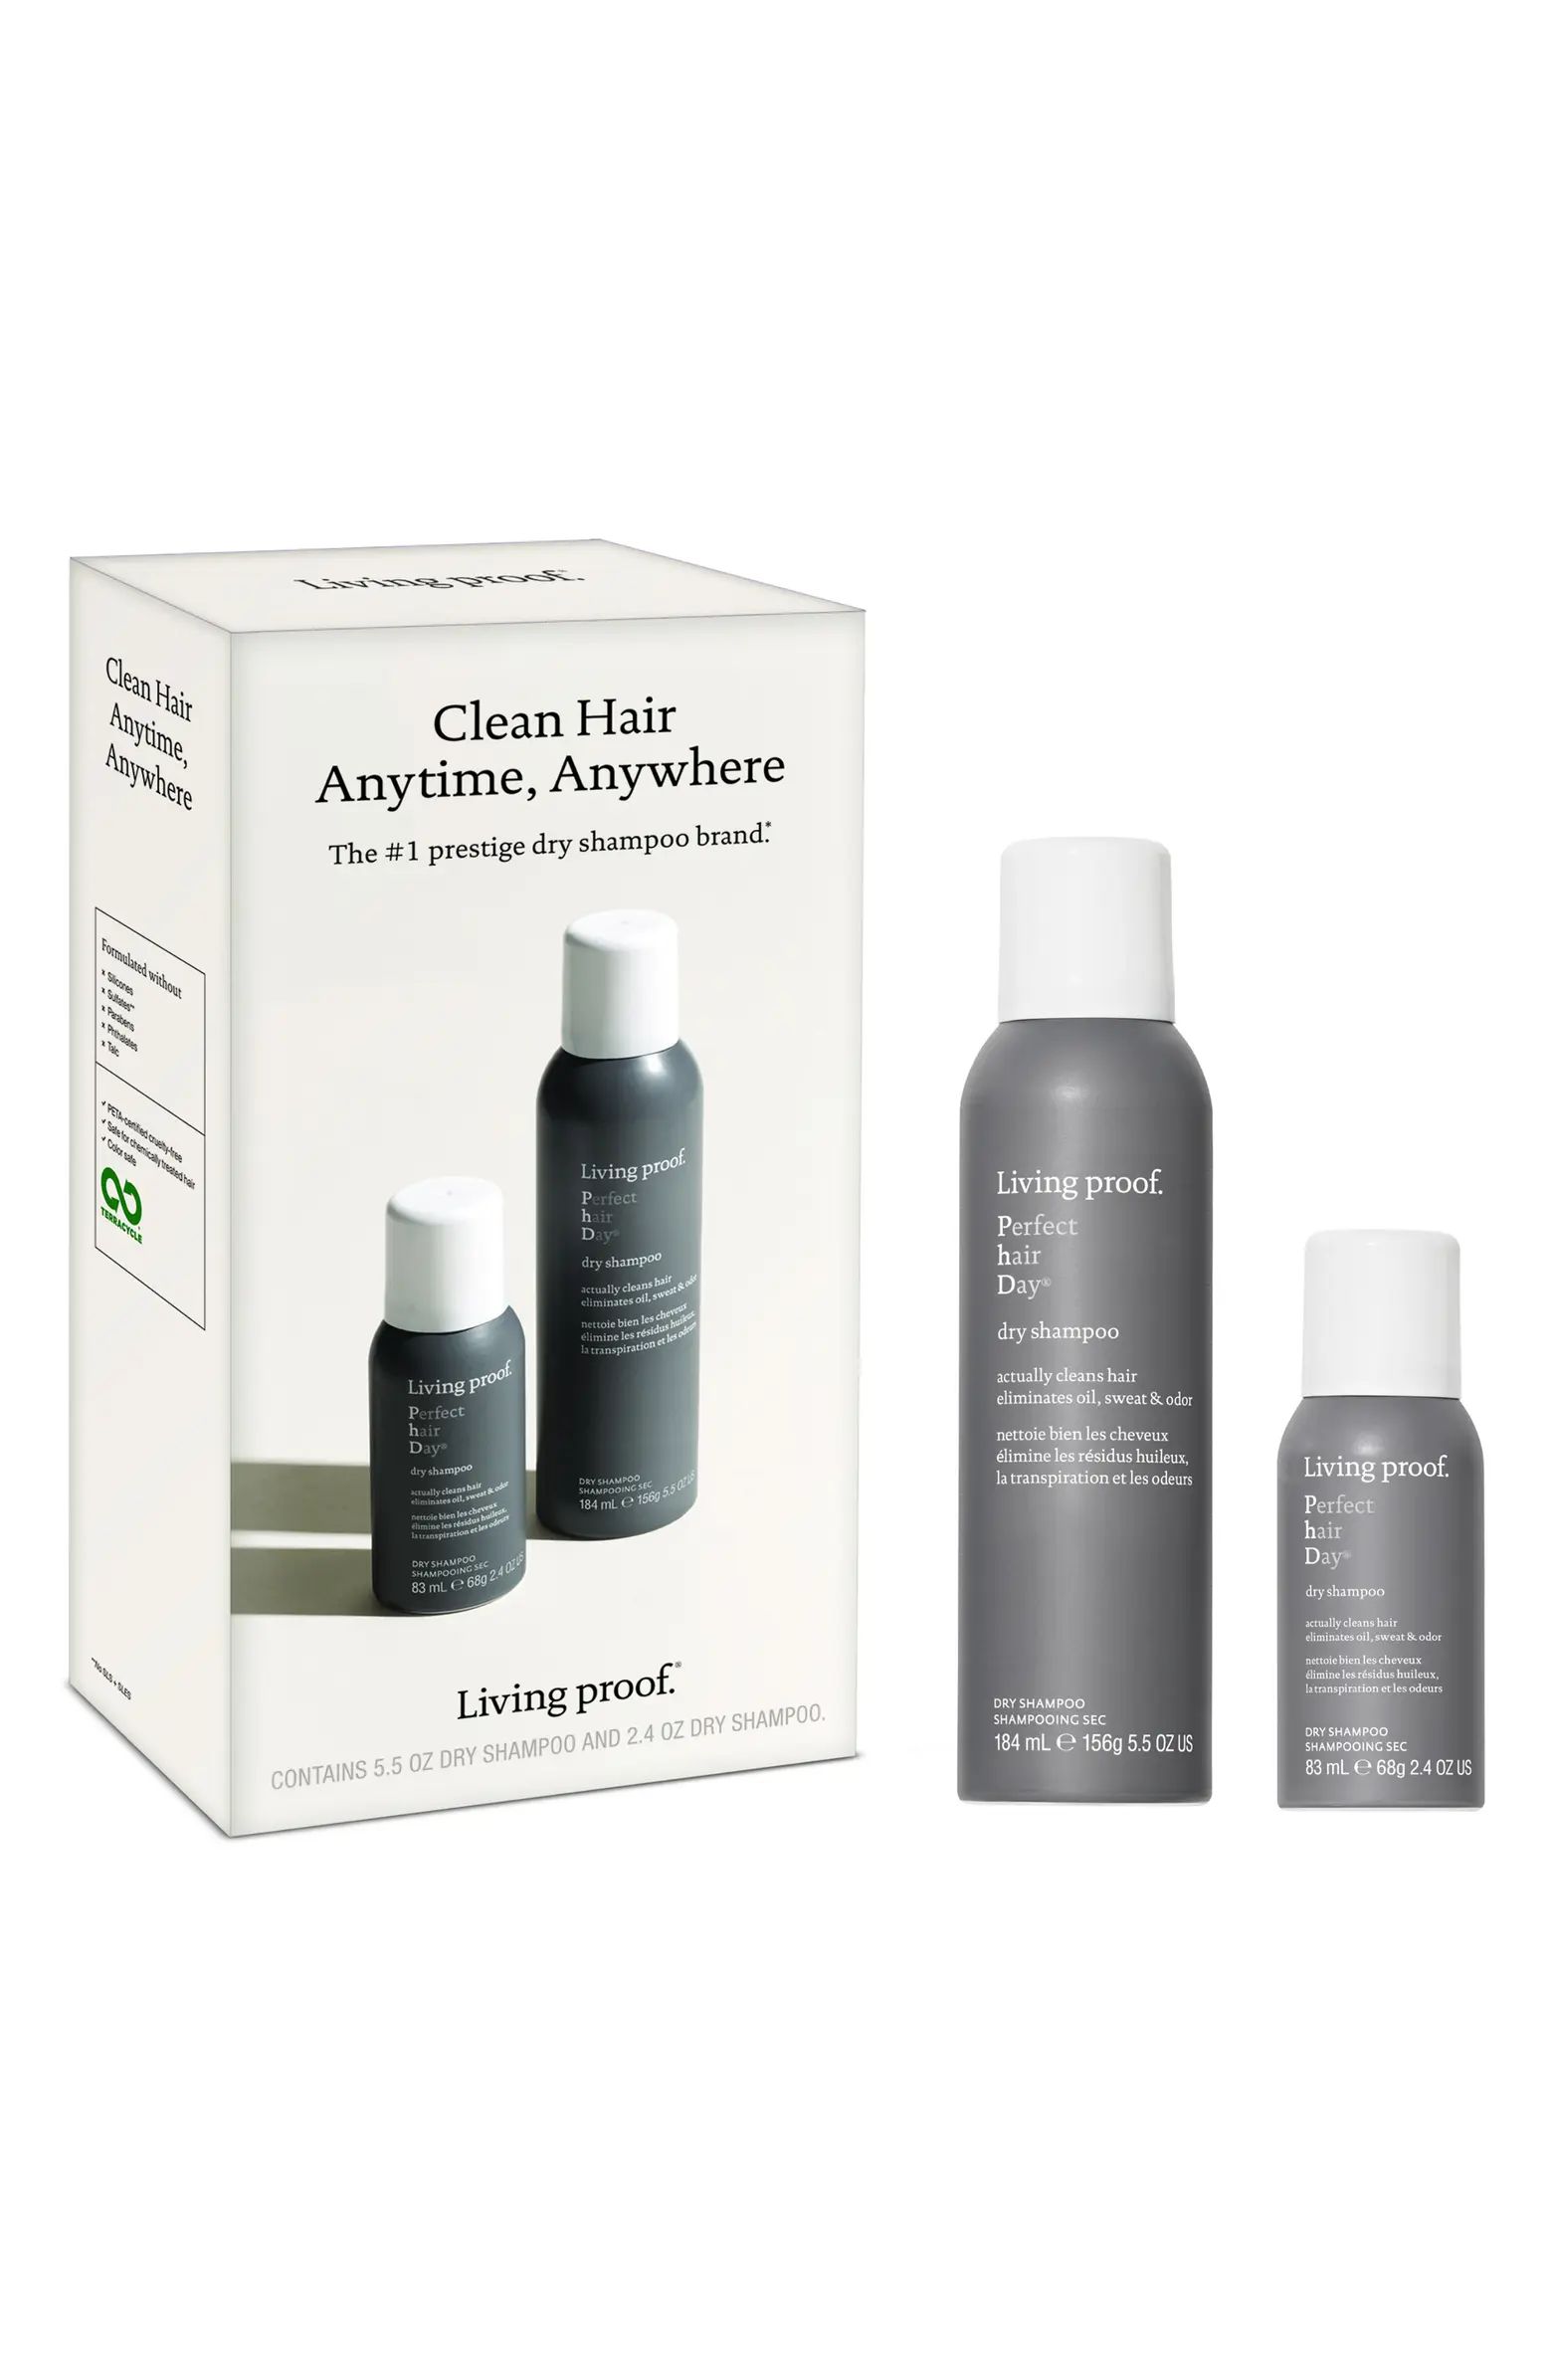 Living proof® Clean Hair Anytime, Anywhere Set $46 Value | Nordstrom | Nordstrom